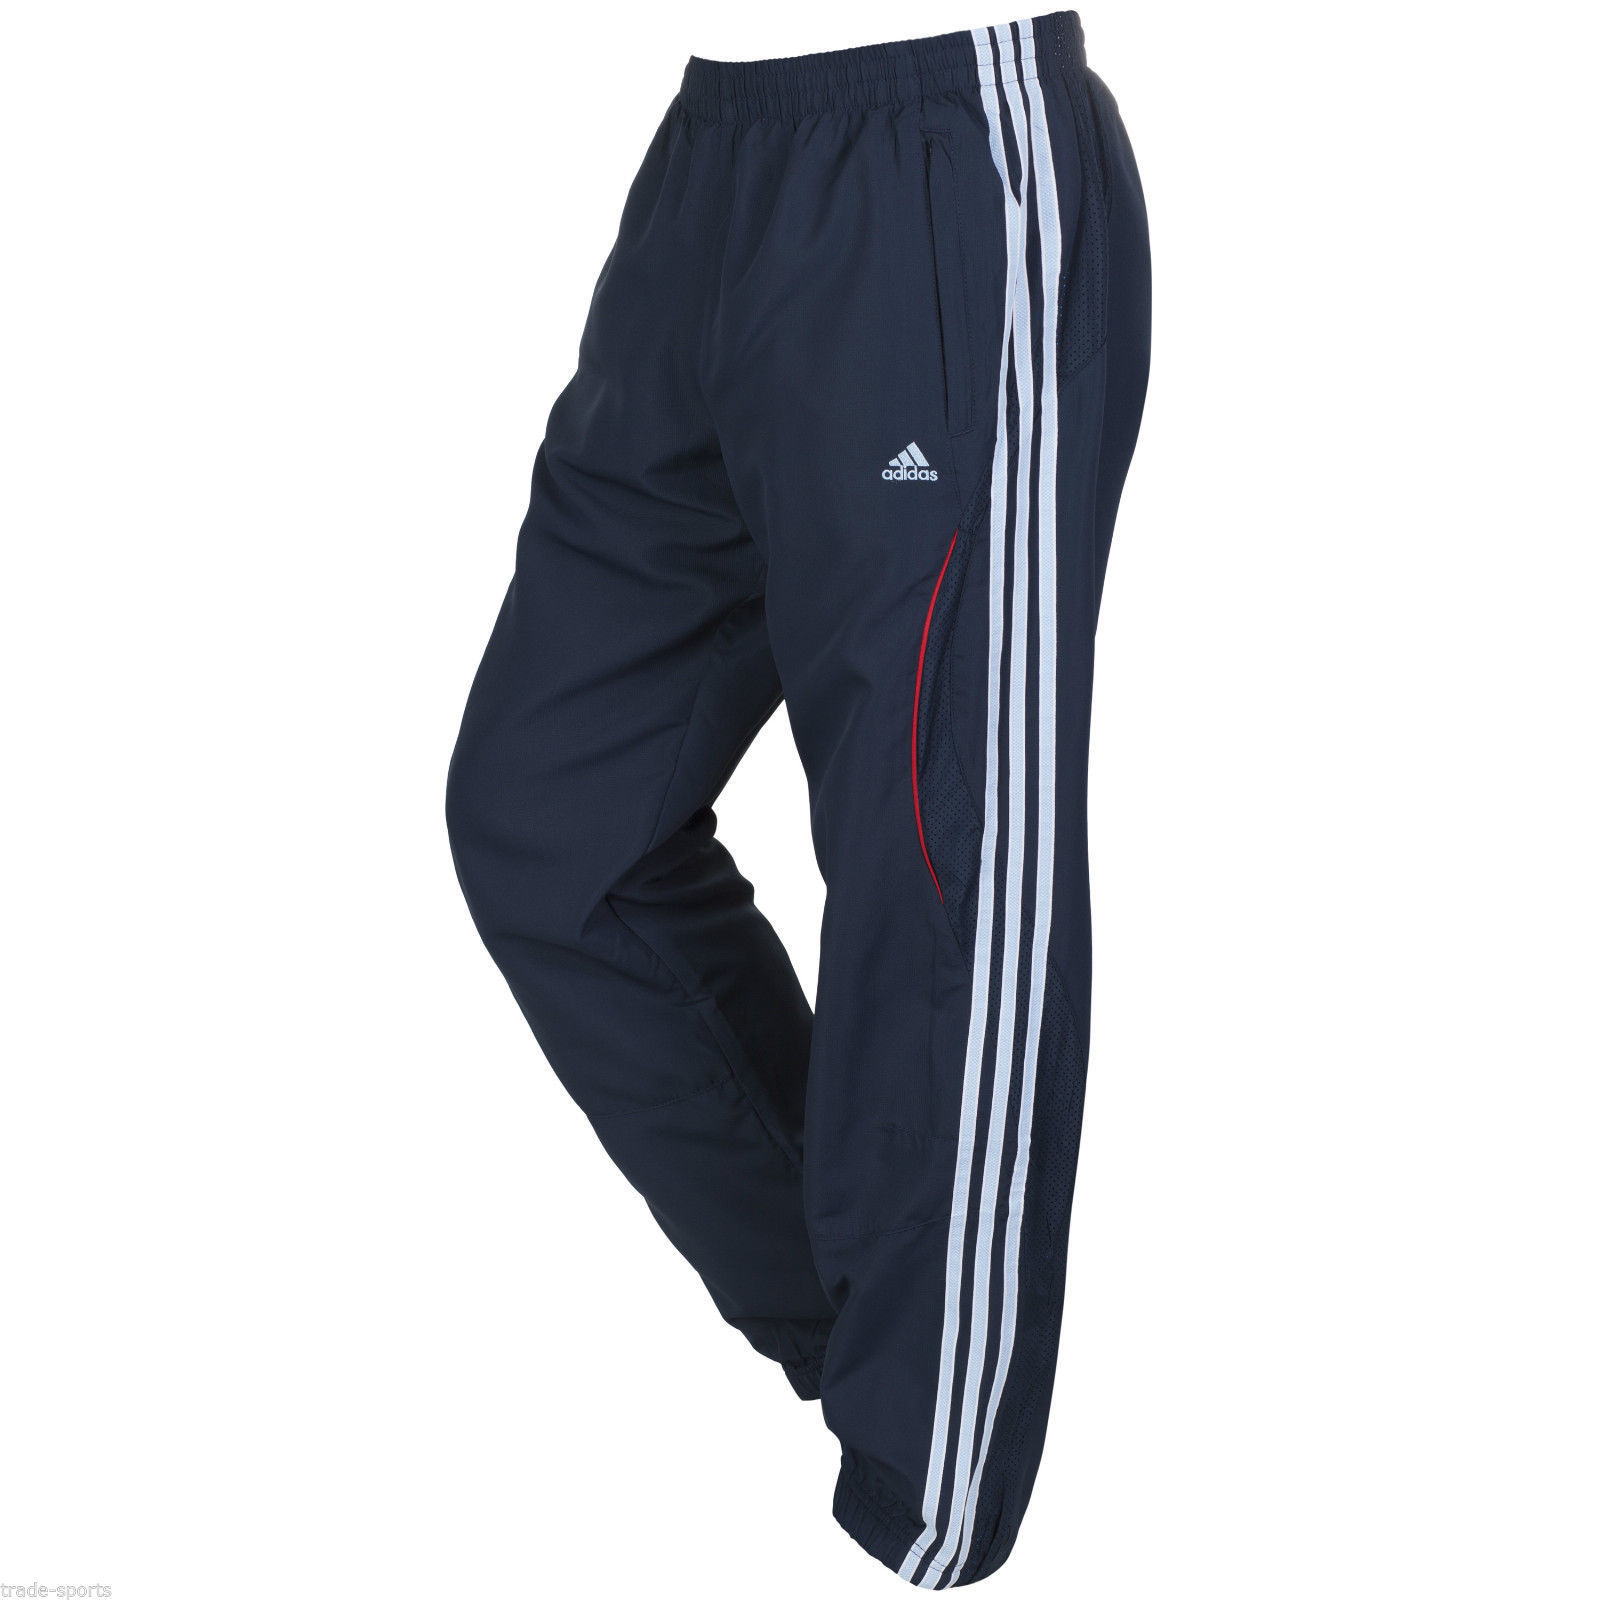 ADIDAS ESSENTIALS 3 STRIPES PANTS SIZE S M TRACKSUIT BOTTOMS CLIMALITE RUNNING